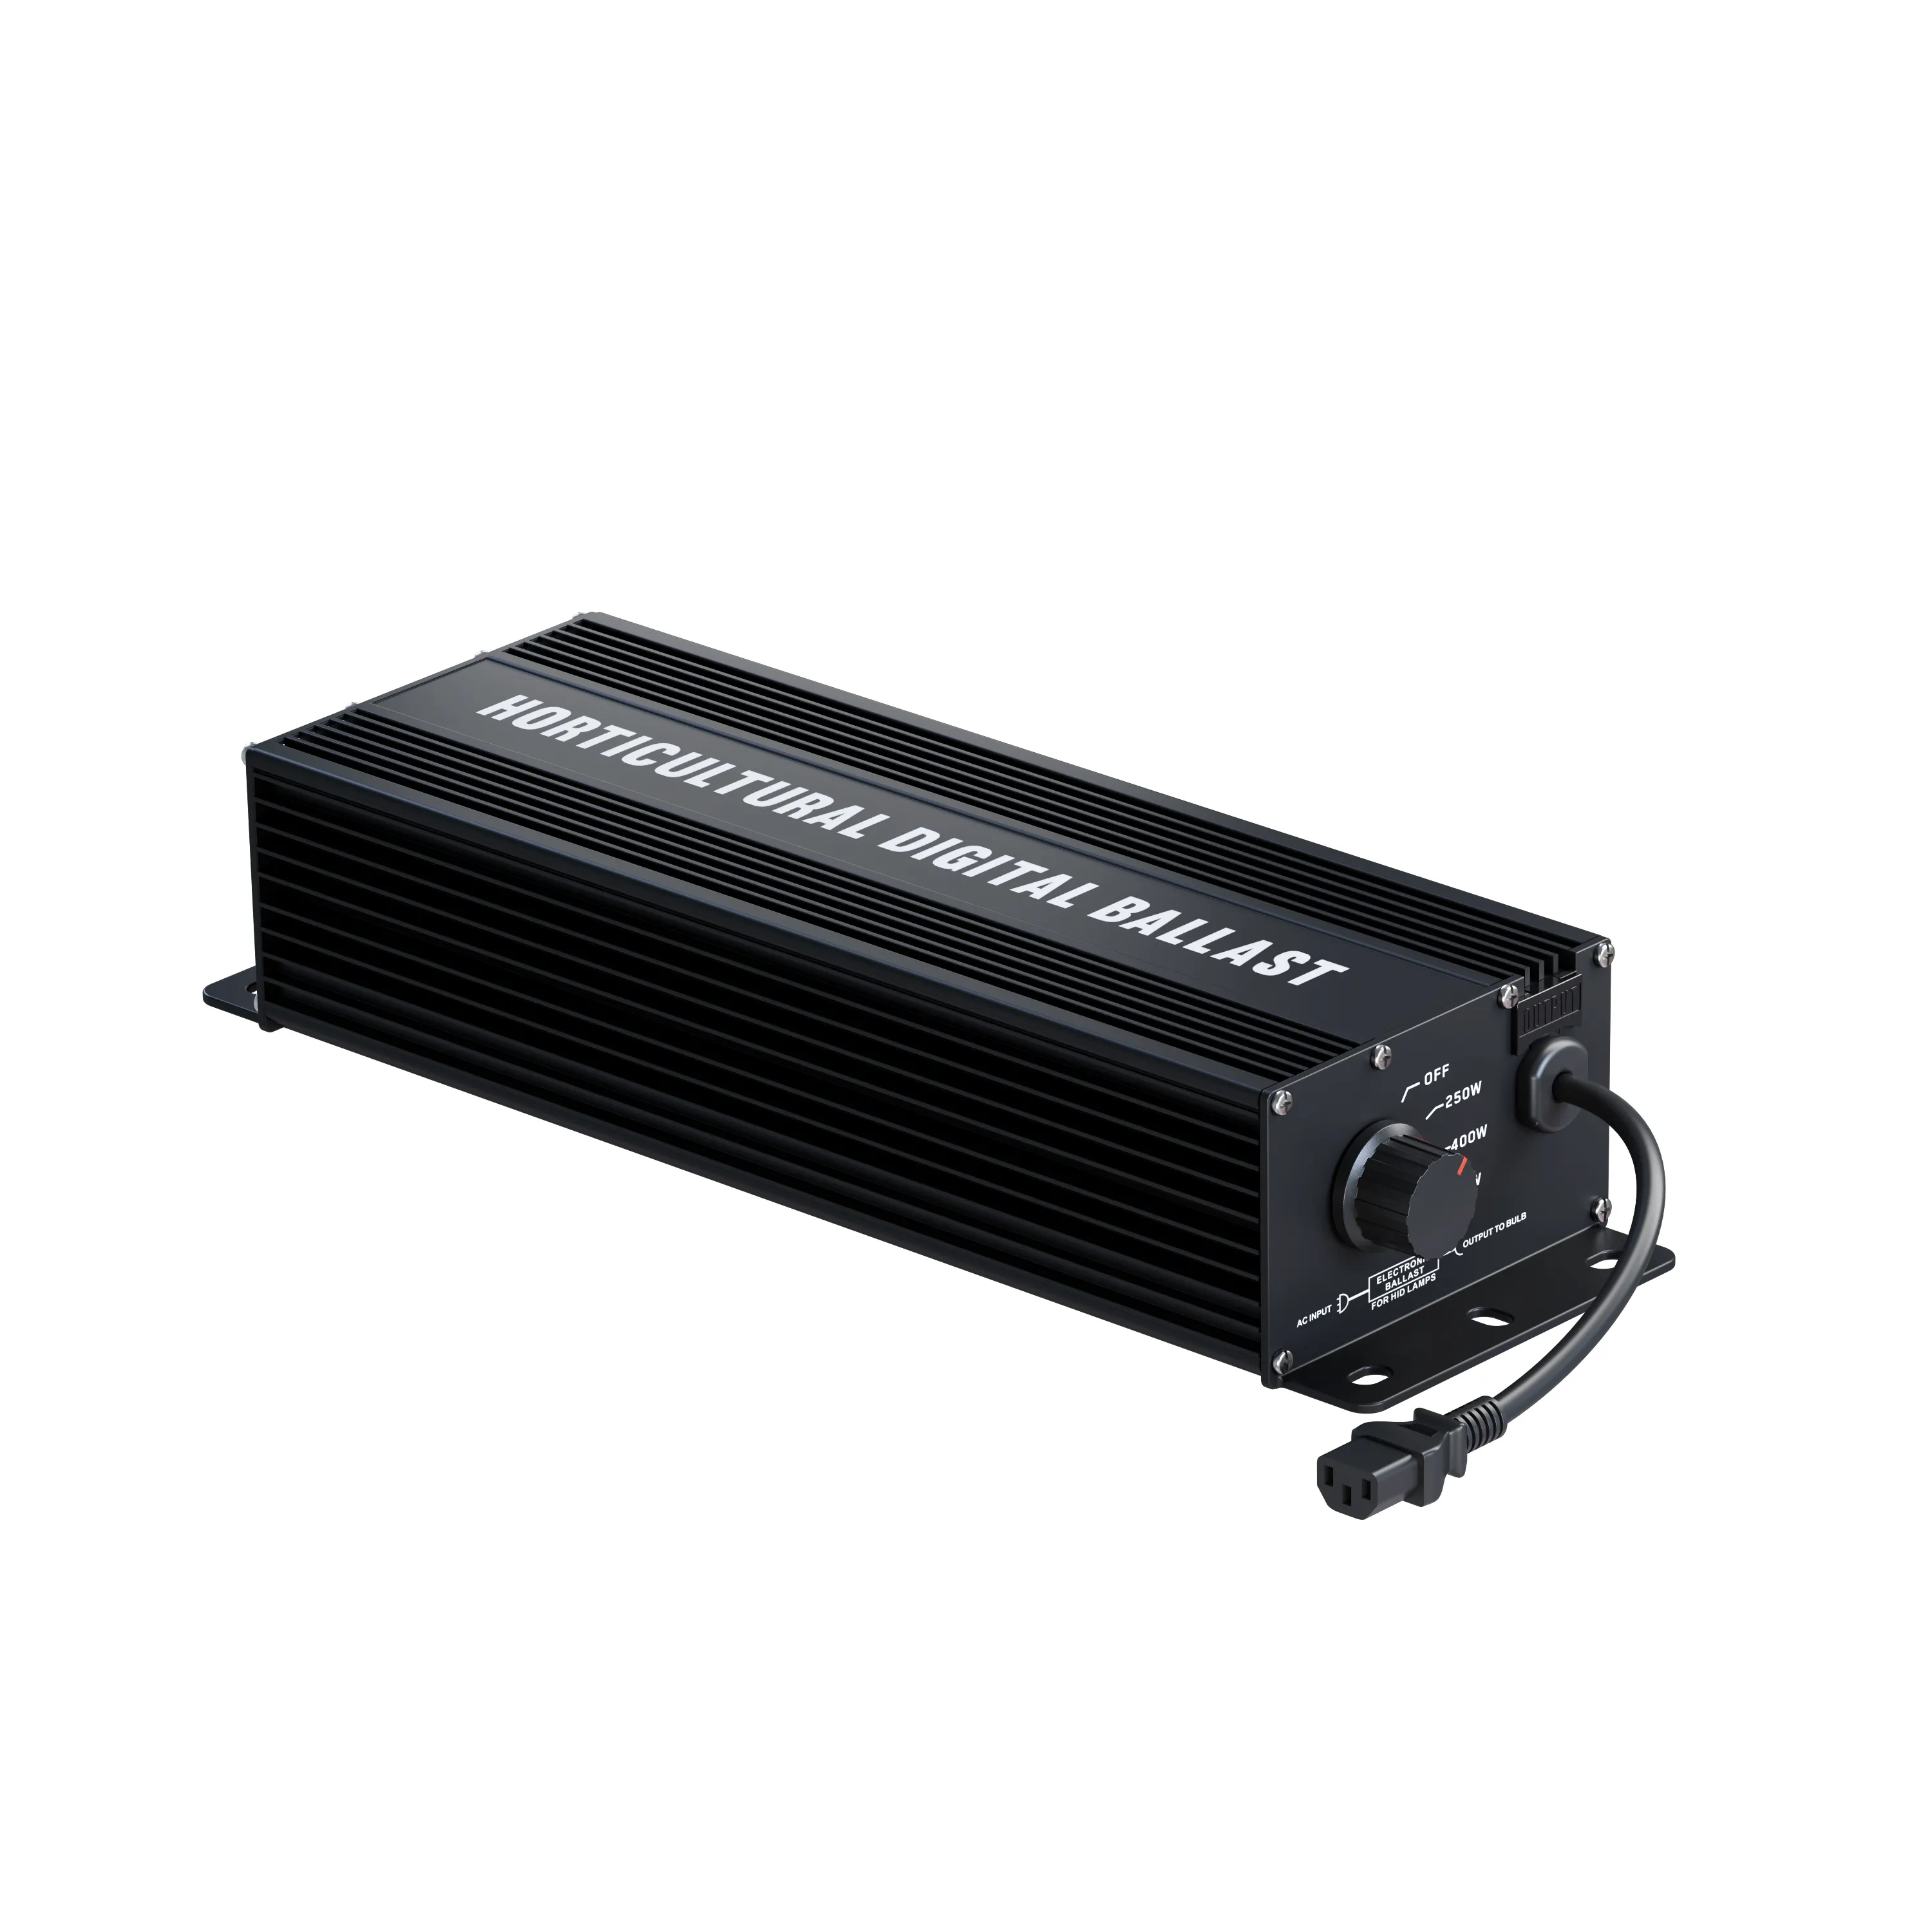 Digital 250w 400w 600w 660w for HPS grow light electronic dimmable ballast and 600W reflector support customized